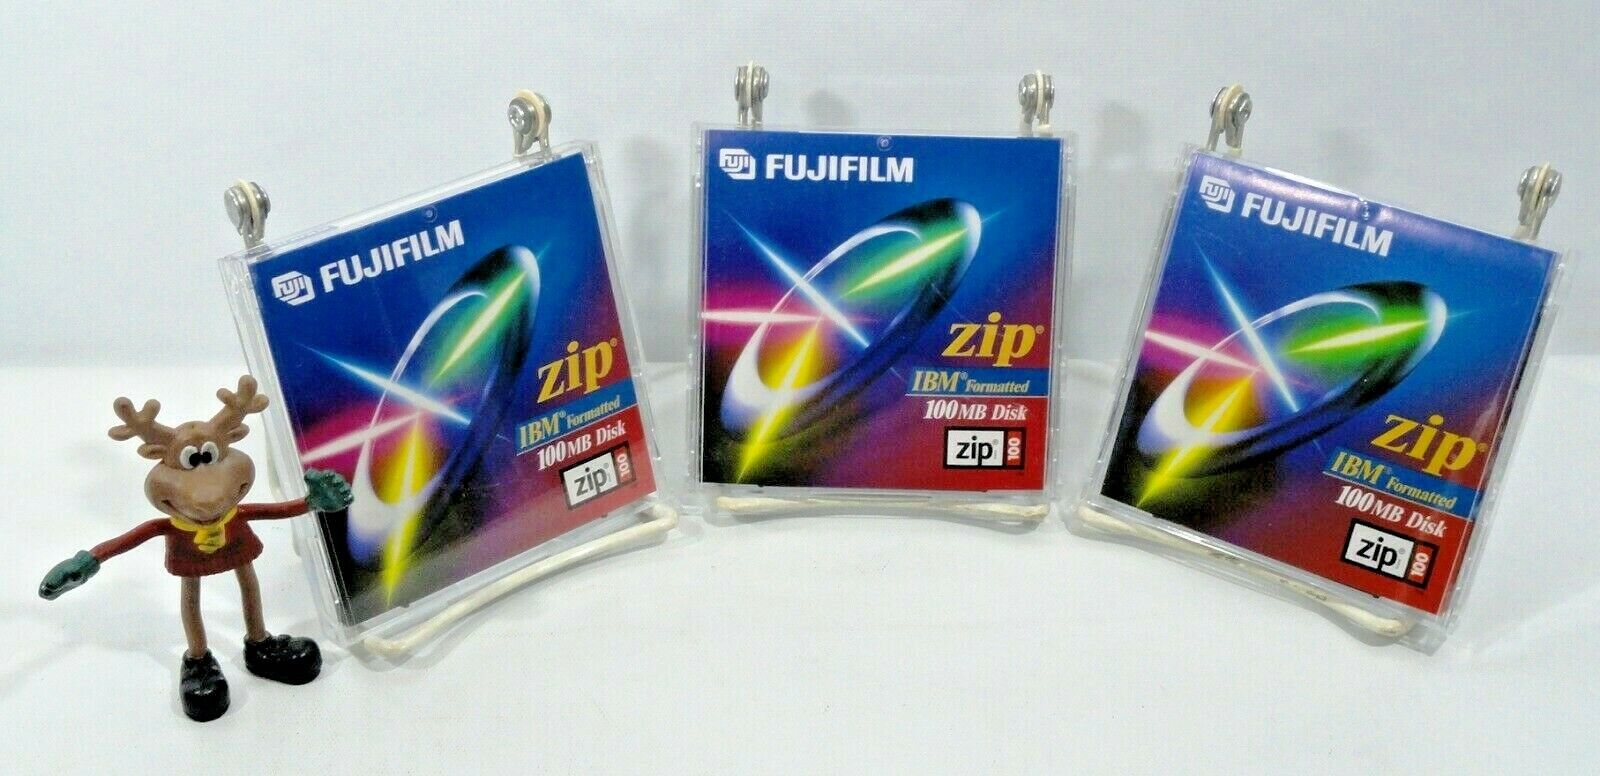 3 Pack Fujifilm 100MB Zip Disk - IBM formatted  Black New Open Box